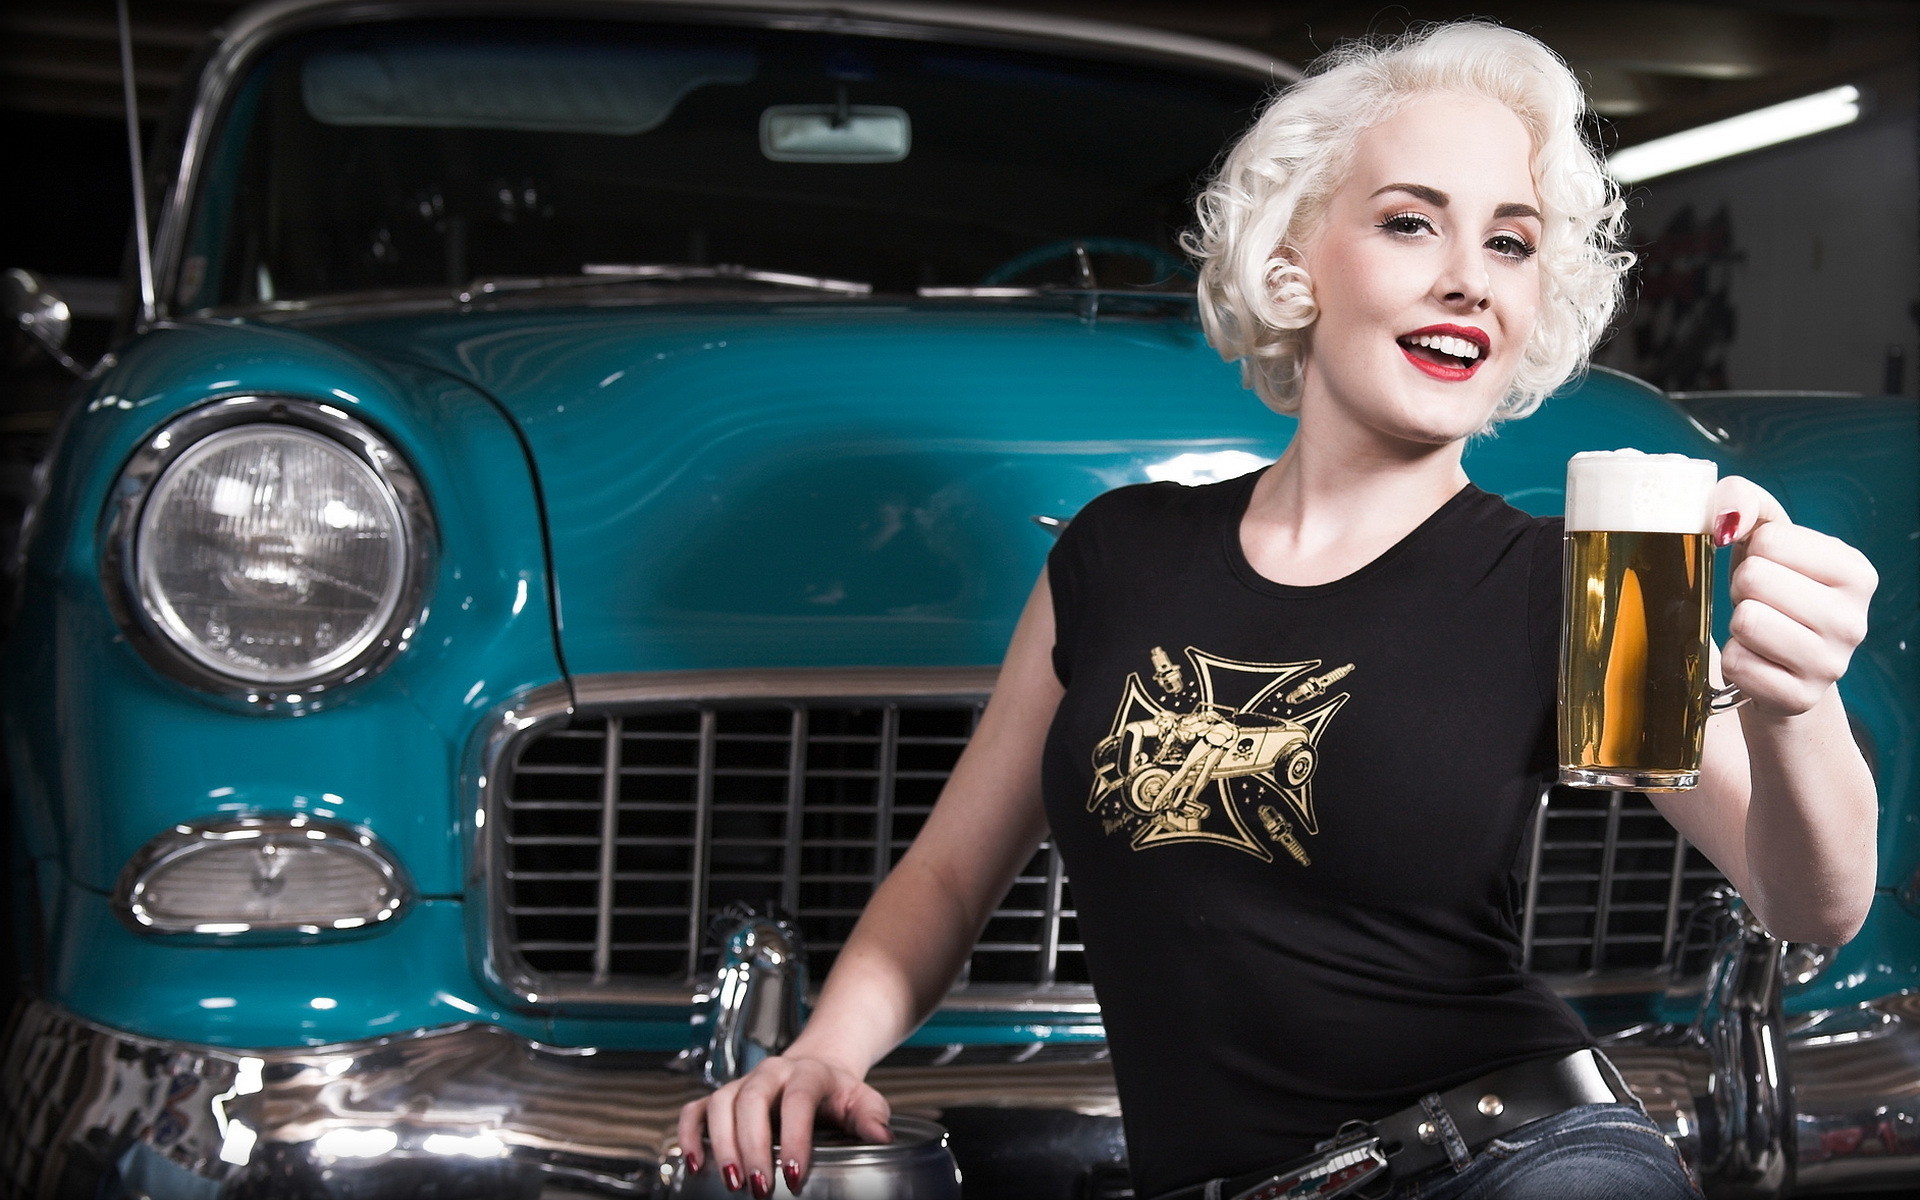 1920x1200 Vehicles cars retro old classic muscle grill lights chrome blue chevy  chevrolet women females girls models blondes face eyes expression smile  beer drinks ...